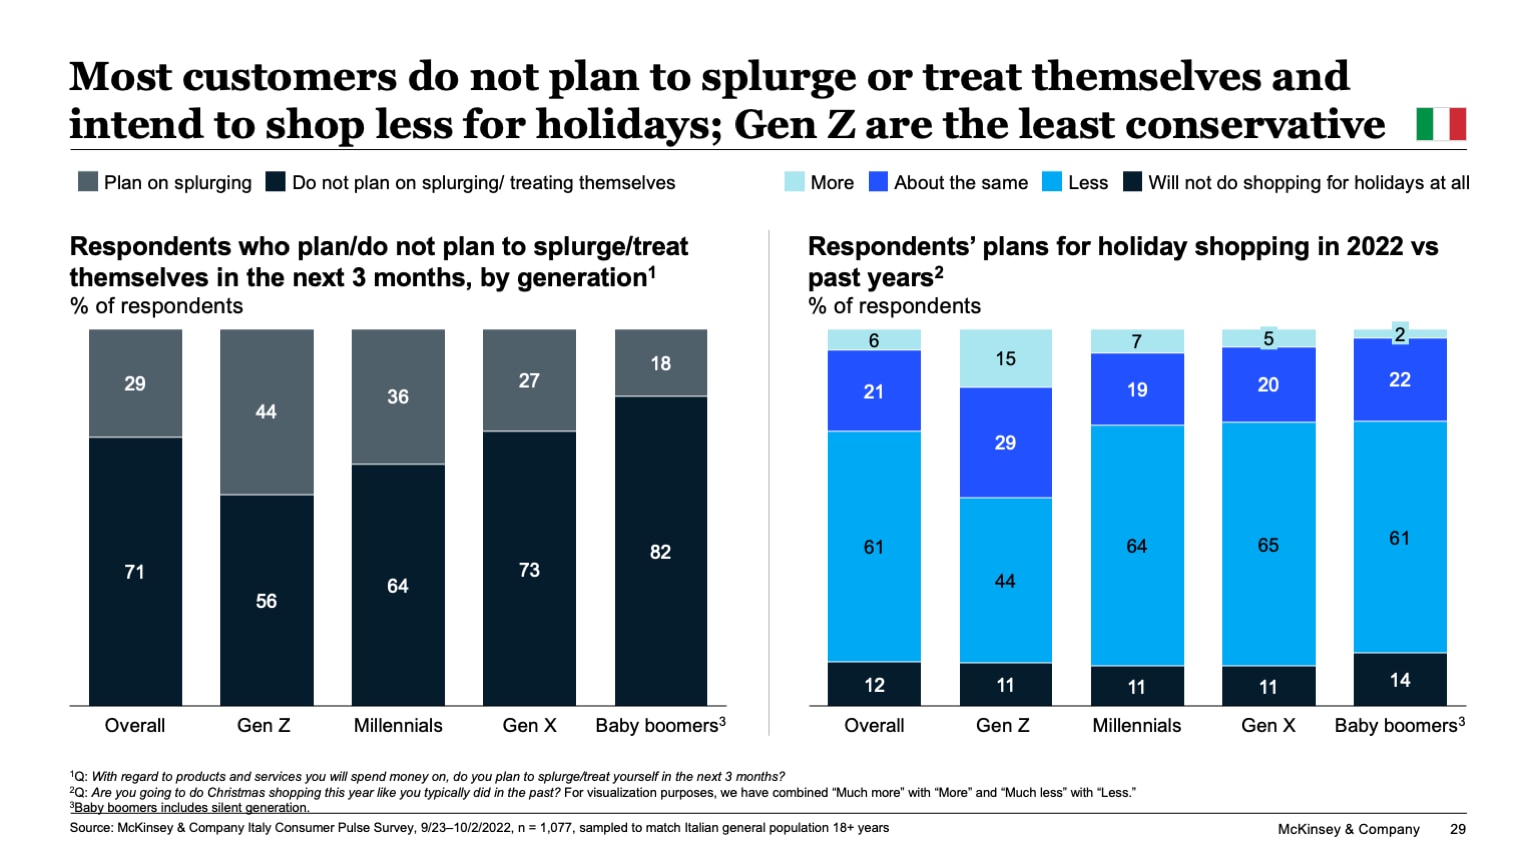 Most customers do not plan to splurge or treat themselves and intend to shop less for holidays; Gen Z are the least conservative